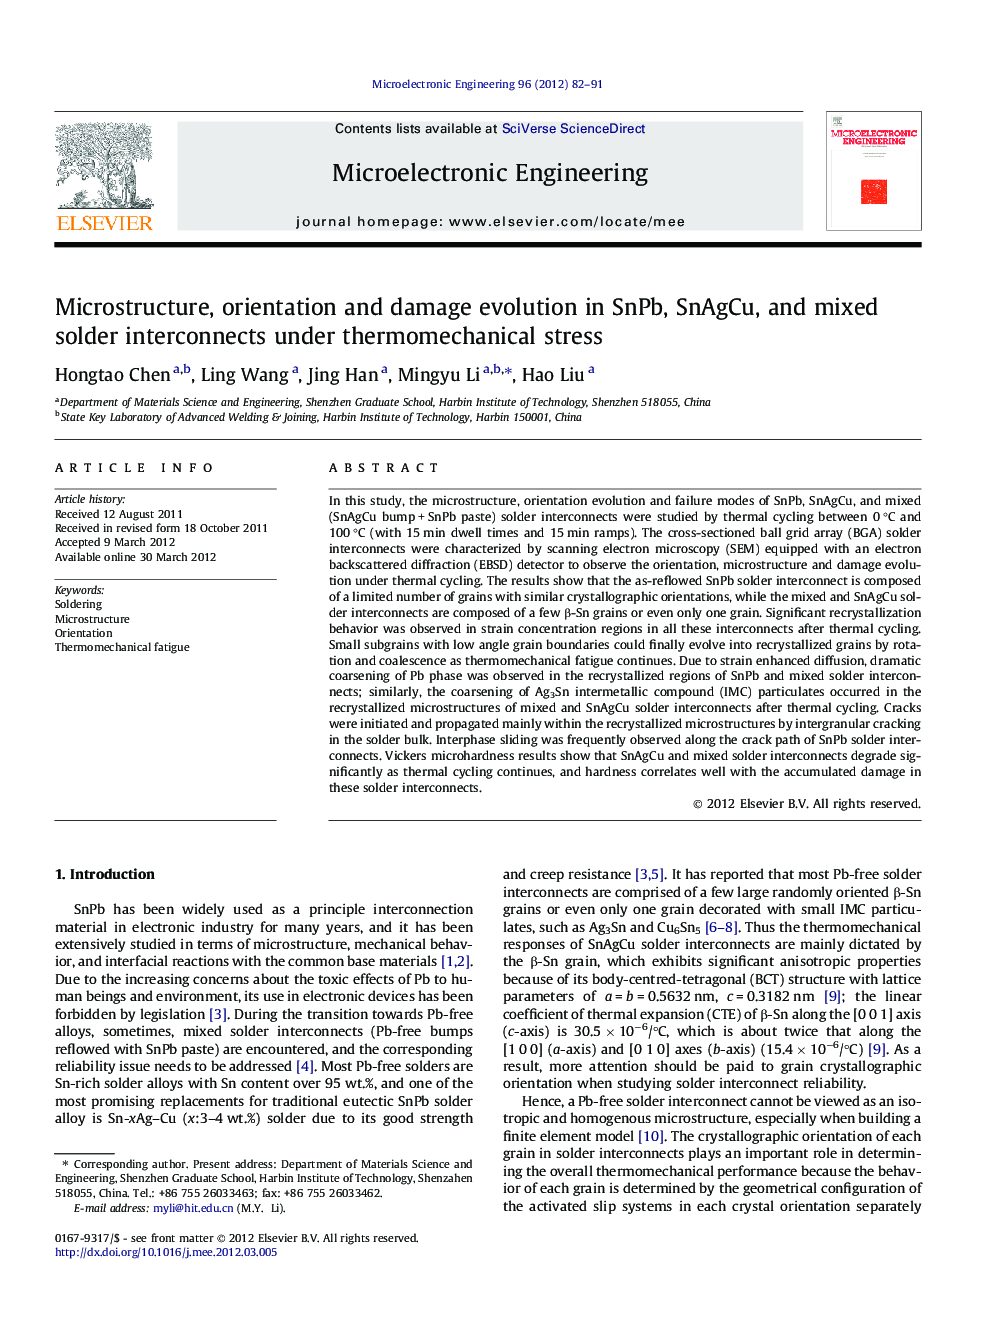 Microstructure, orientation and damage evolution in SnPb, SnAgCu, and mixed solder interconnects under thermomechanical stress